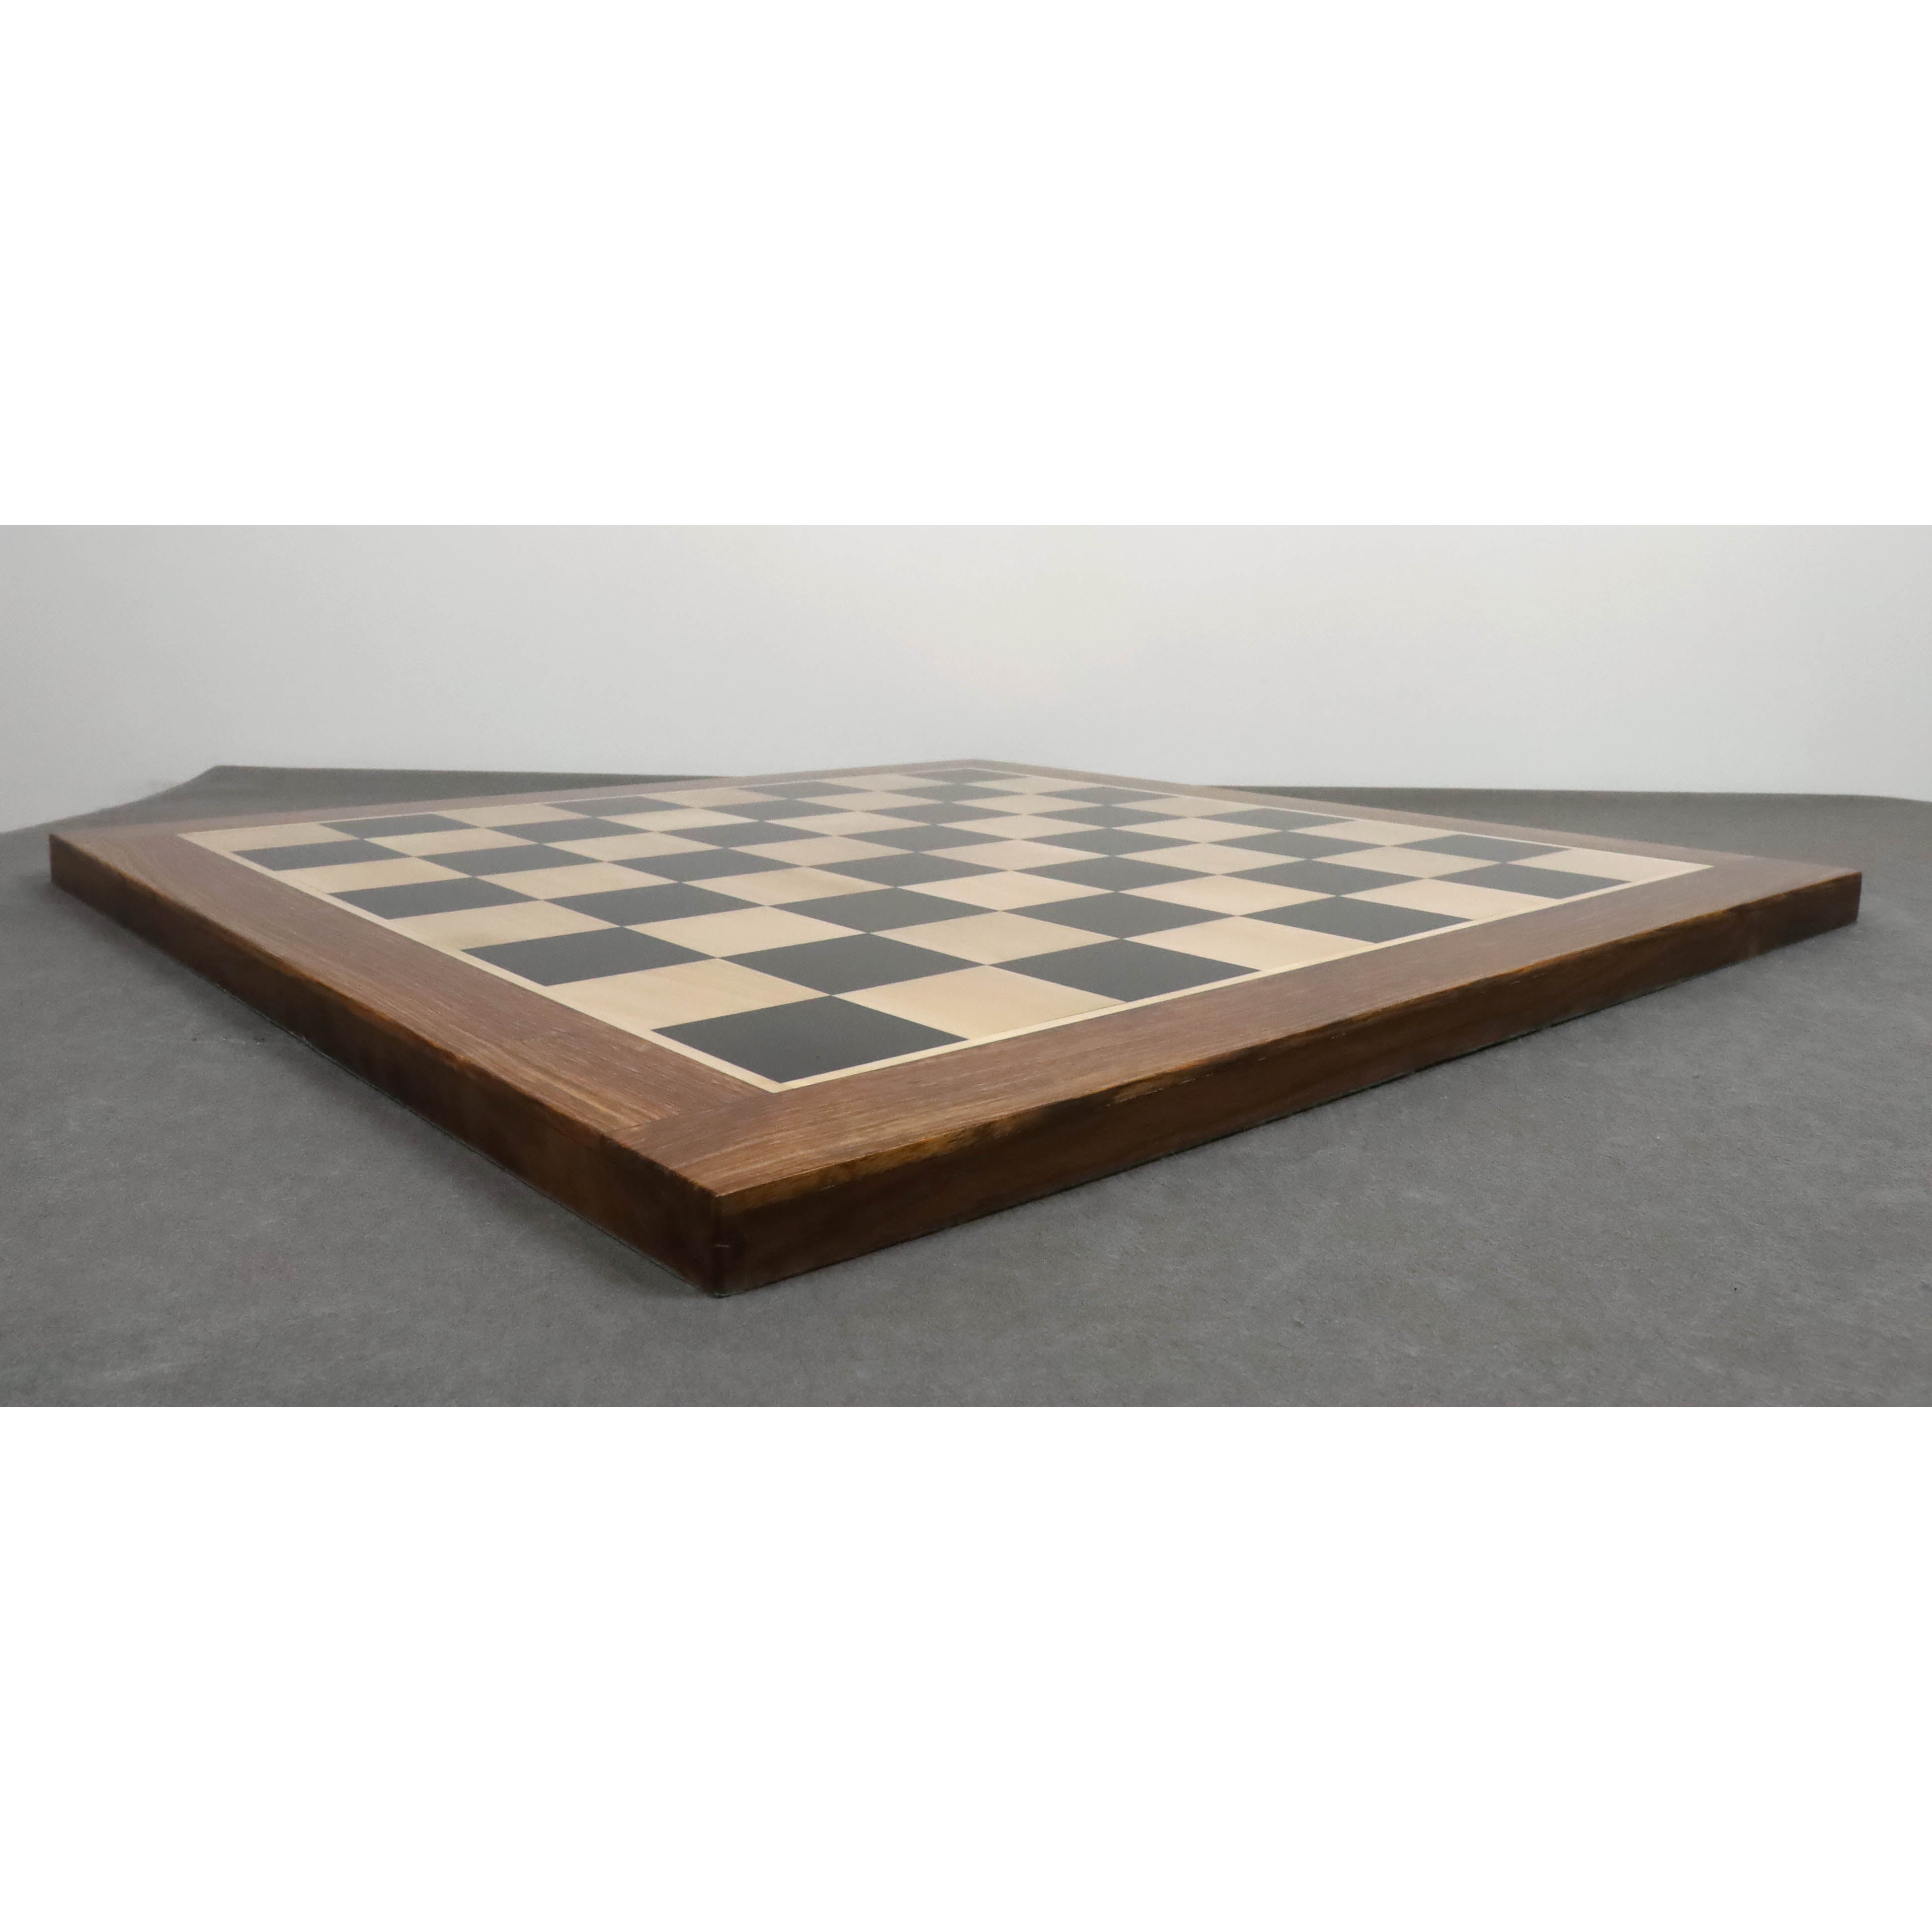 Arthur Luxury Staunton Chess Set Combo - Pieces in Ebony Wood with 23inches Chessboard and Storage Box